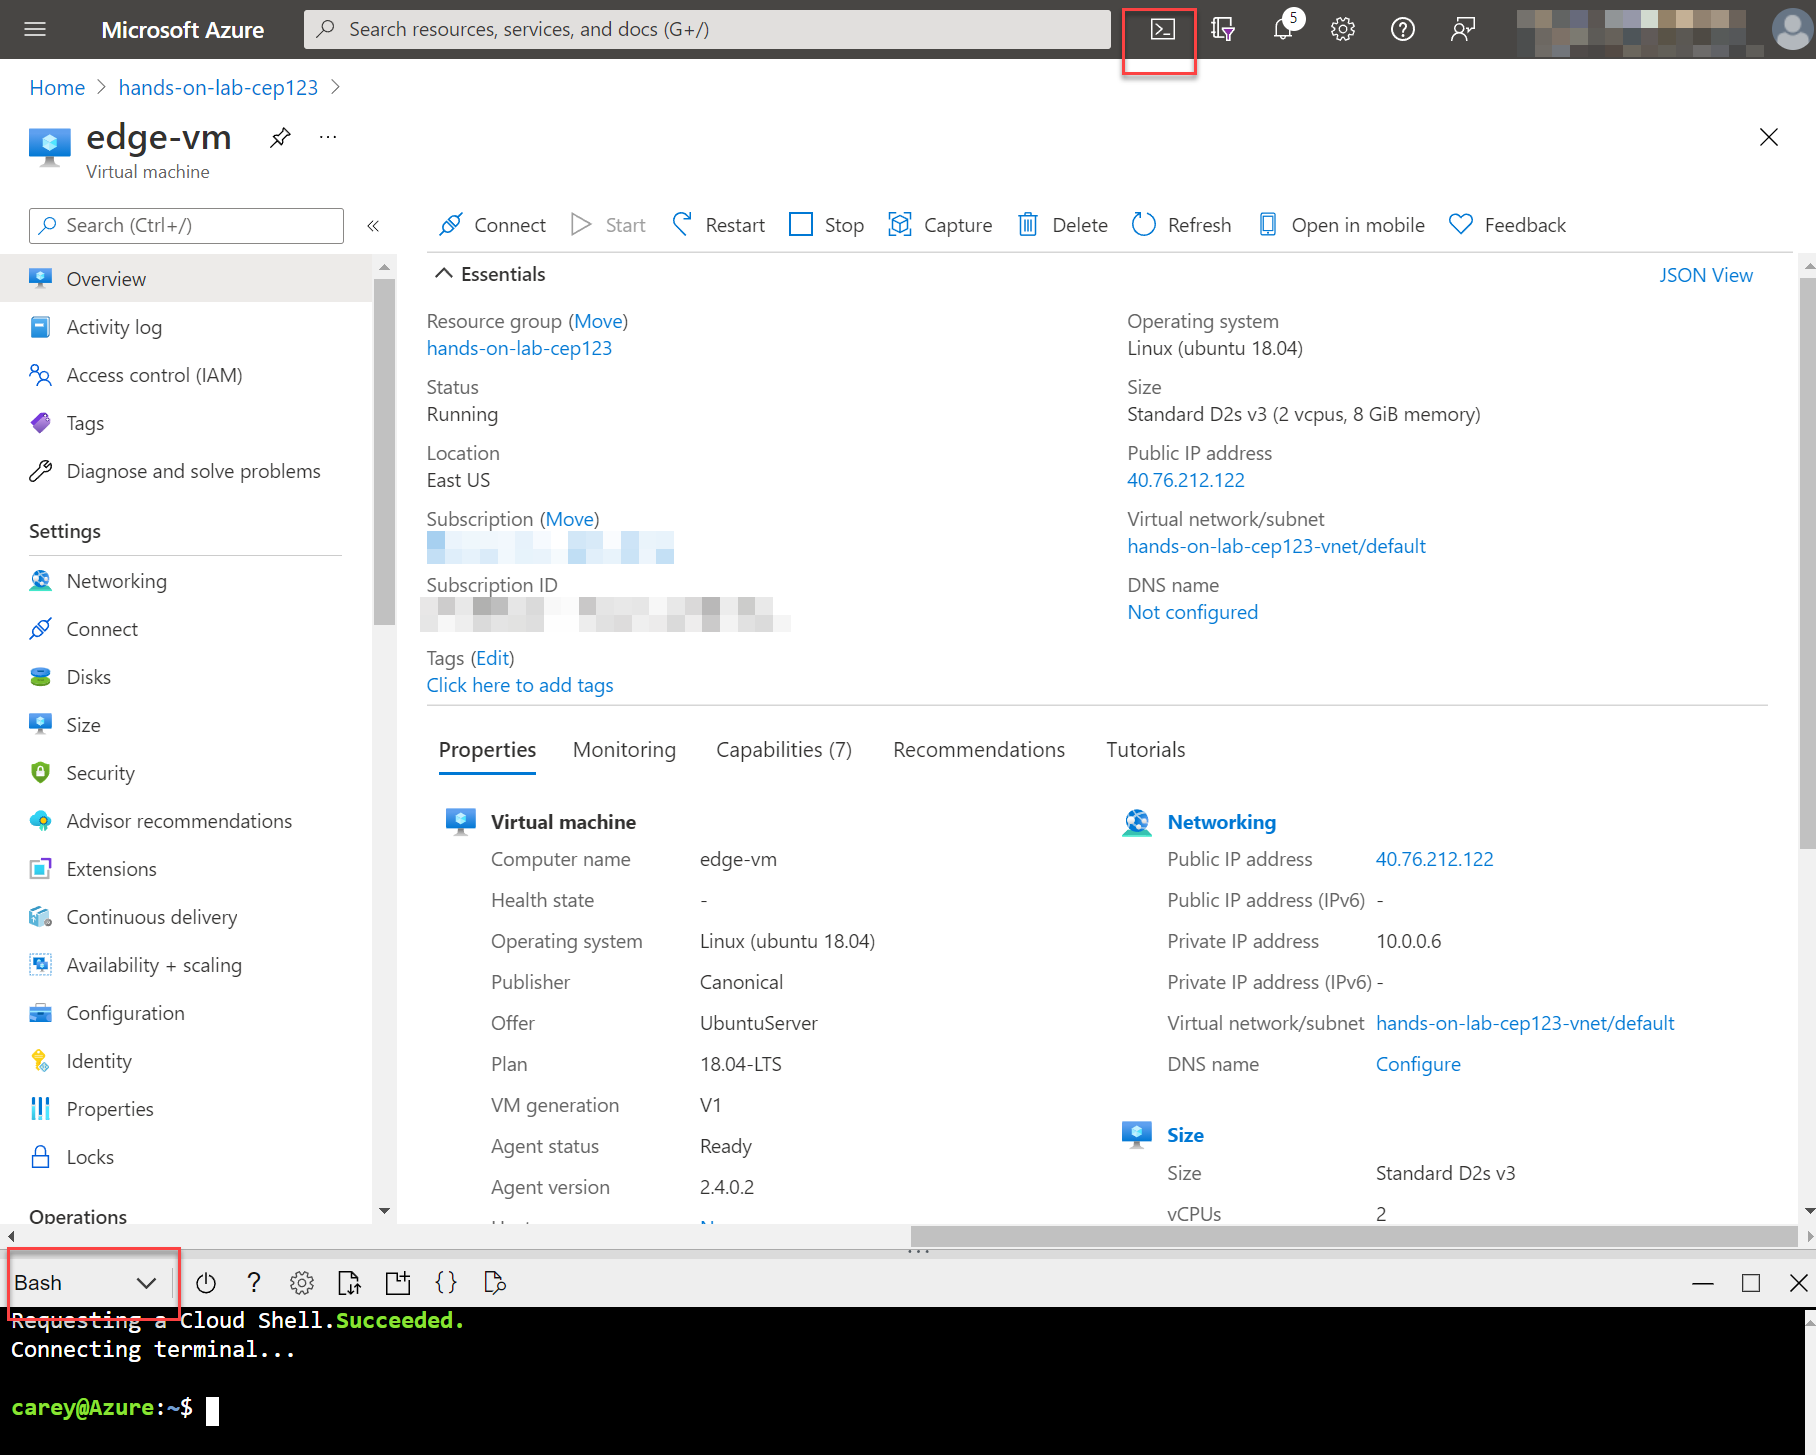 The Azure Portal displays with the cloud shell icon highlighted in the top-right toolbar menu and Bash selected as the language.